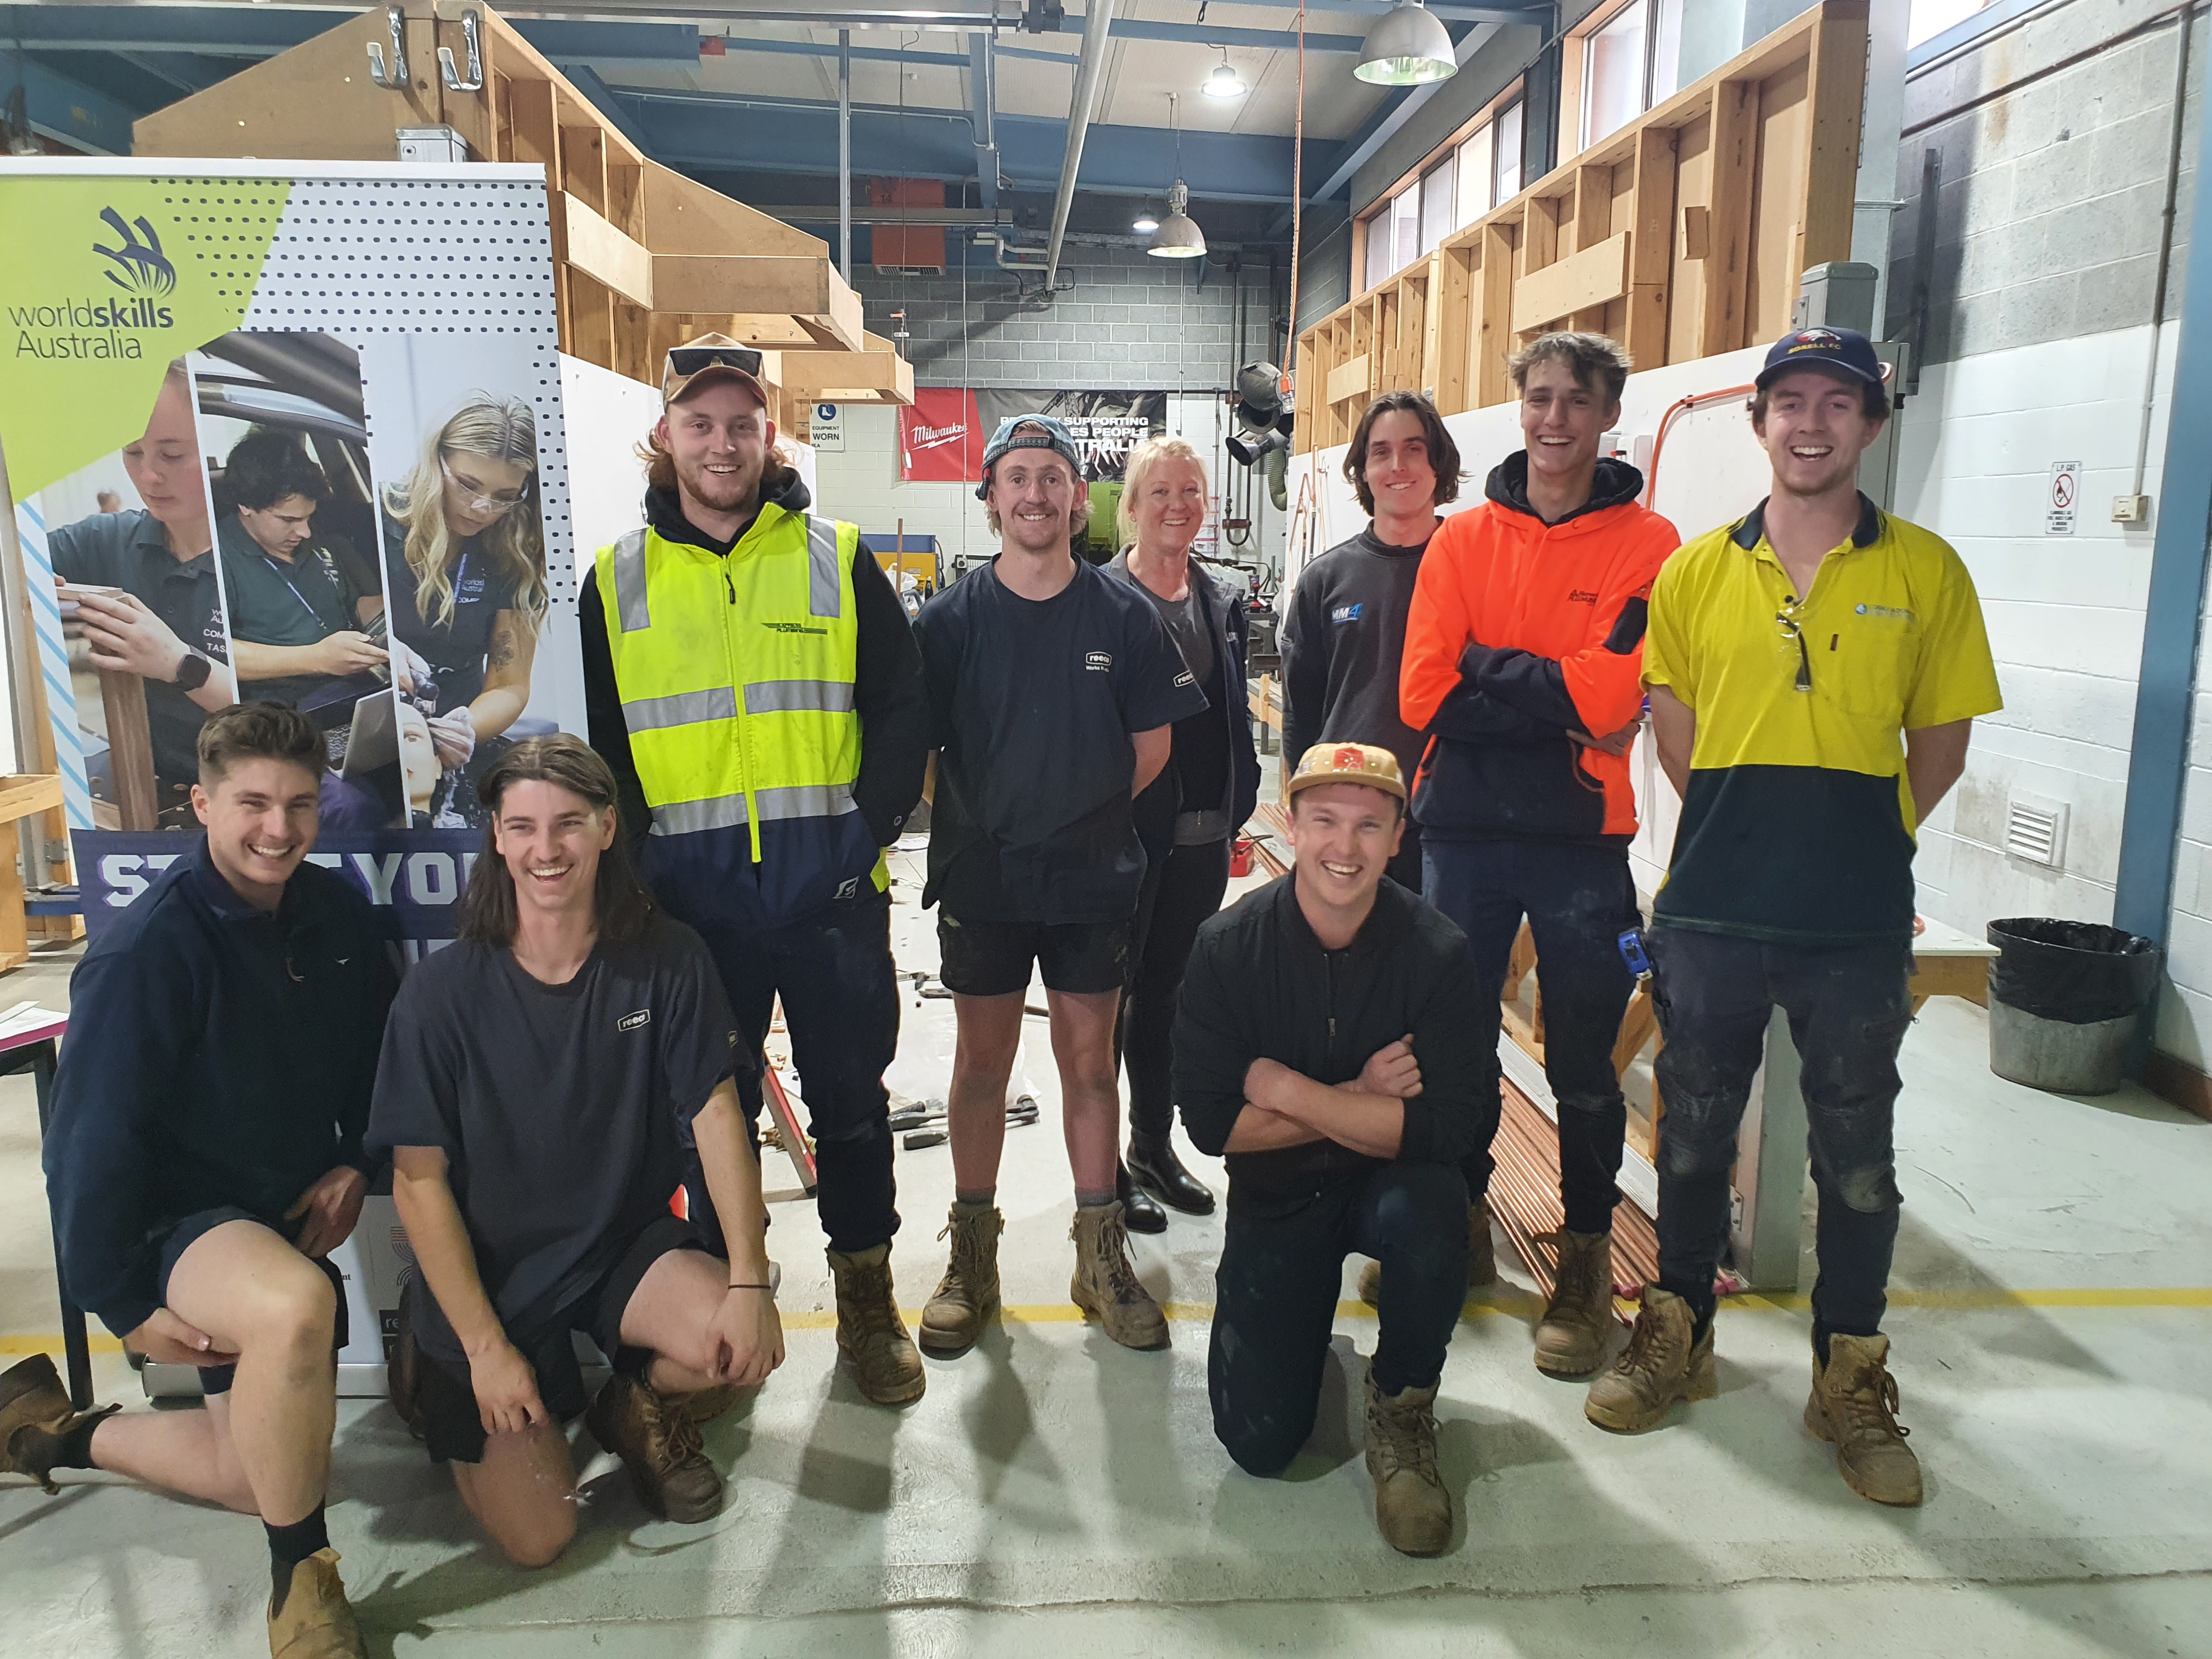 group photo in the plumbing and construction workshop